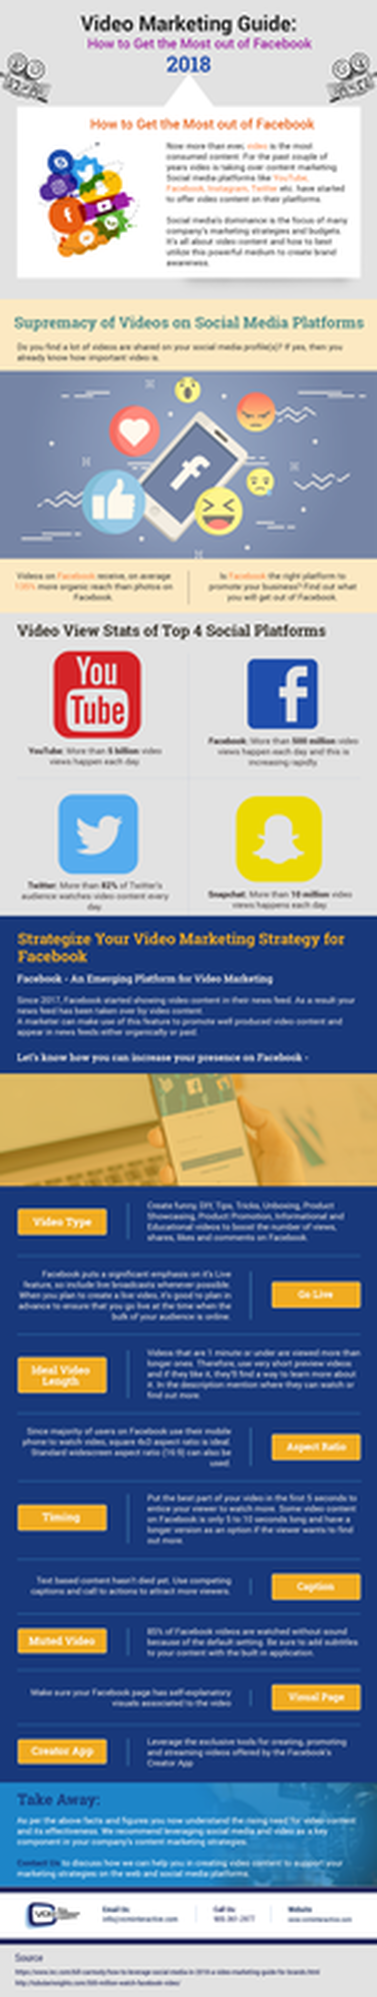 Video Production Company - Guide for Facebook